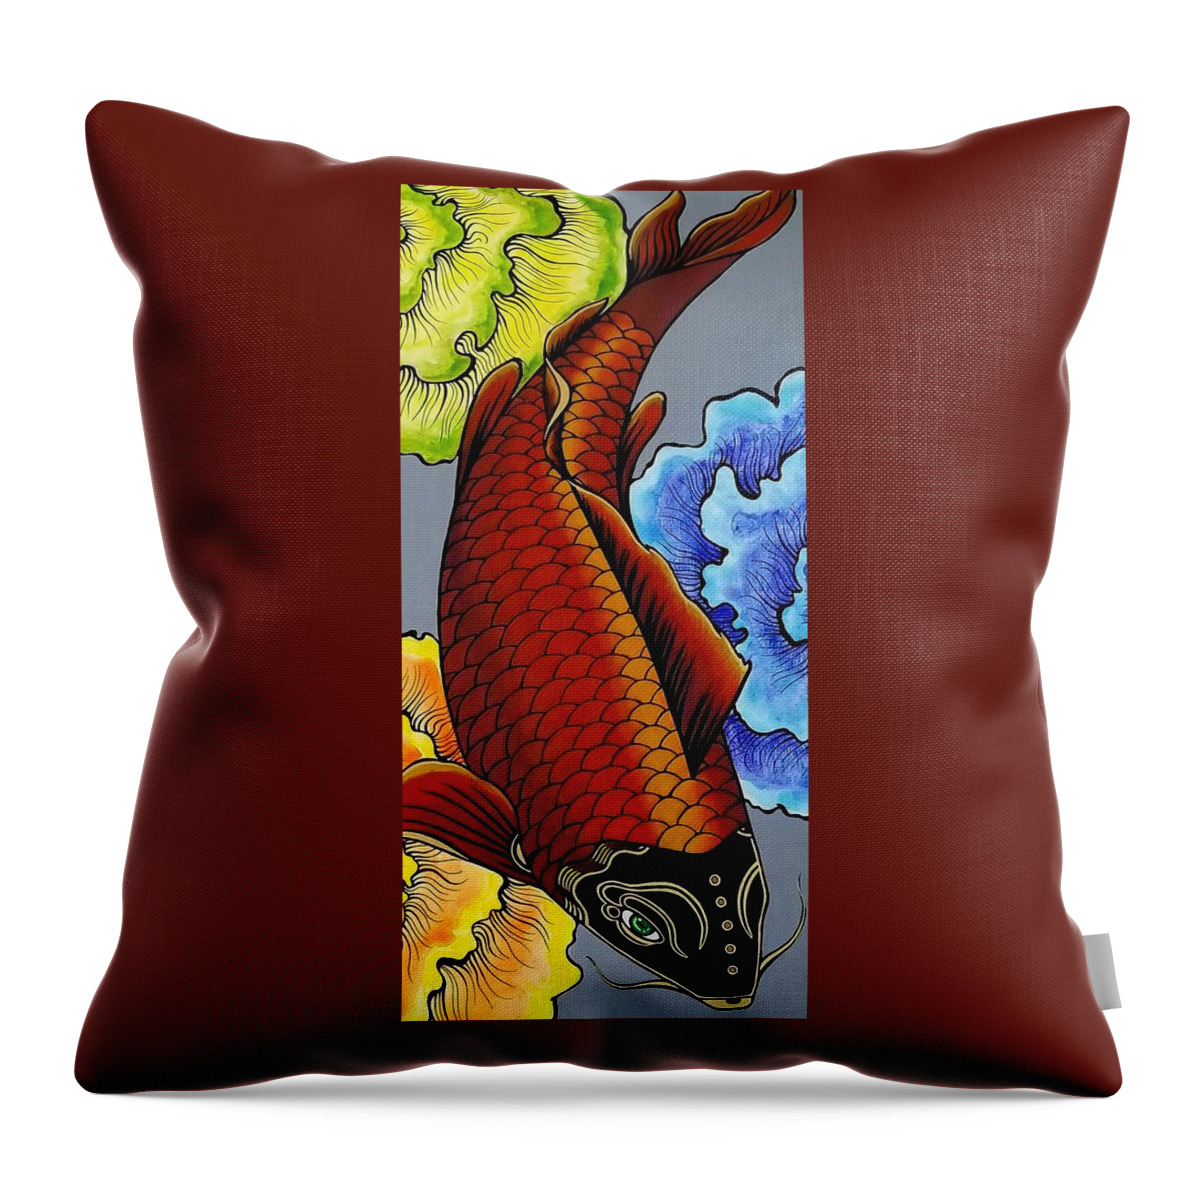  Throw Pillow featuring the painting Metallic Koi Fish by Bryon Stewart